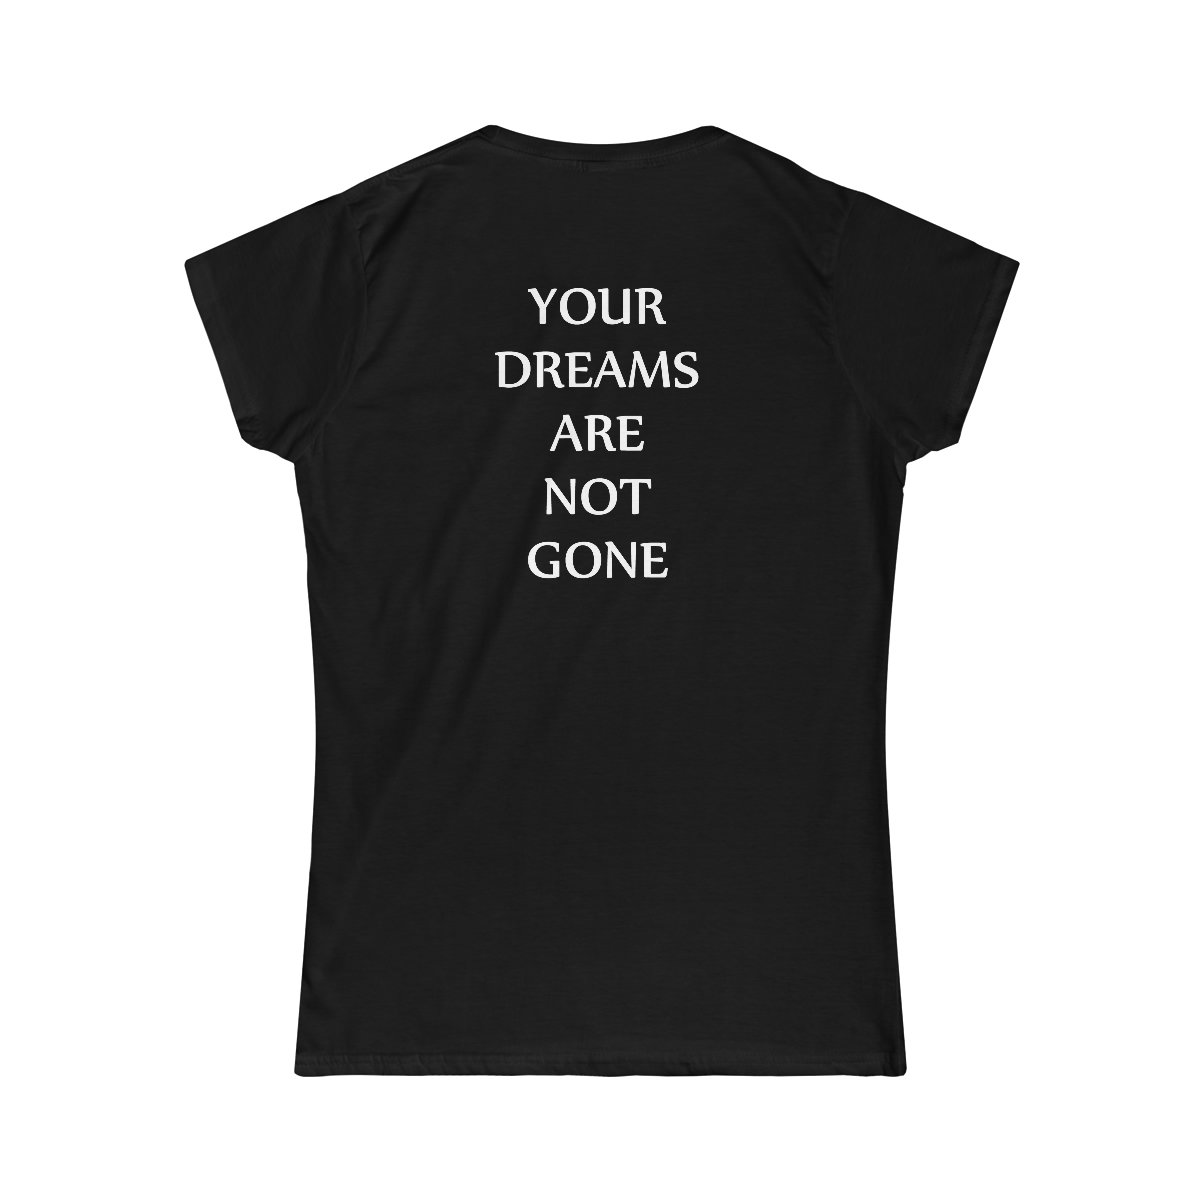 Divine Martyr – More Than What You Are (Version 1) Women’s Short Sleeve Tshirt 64000LD